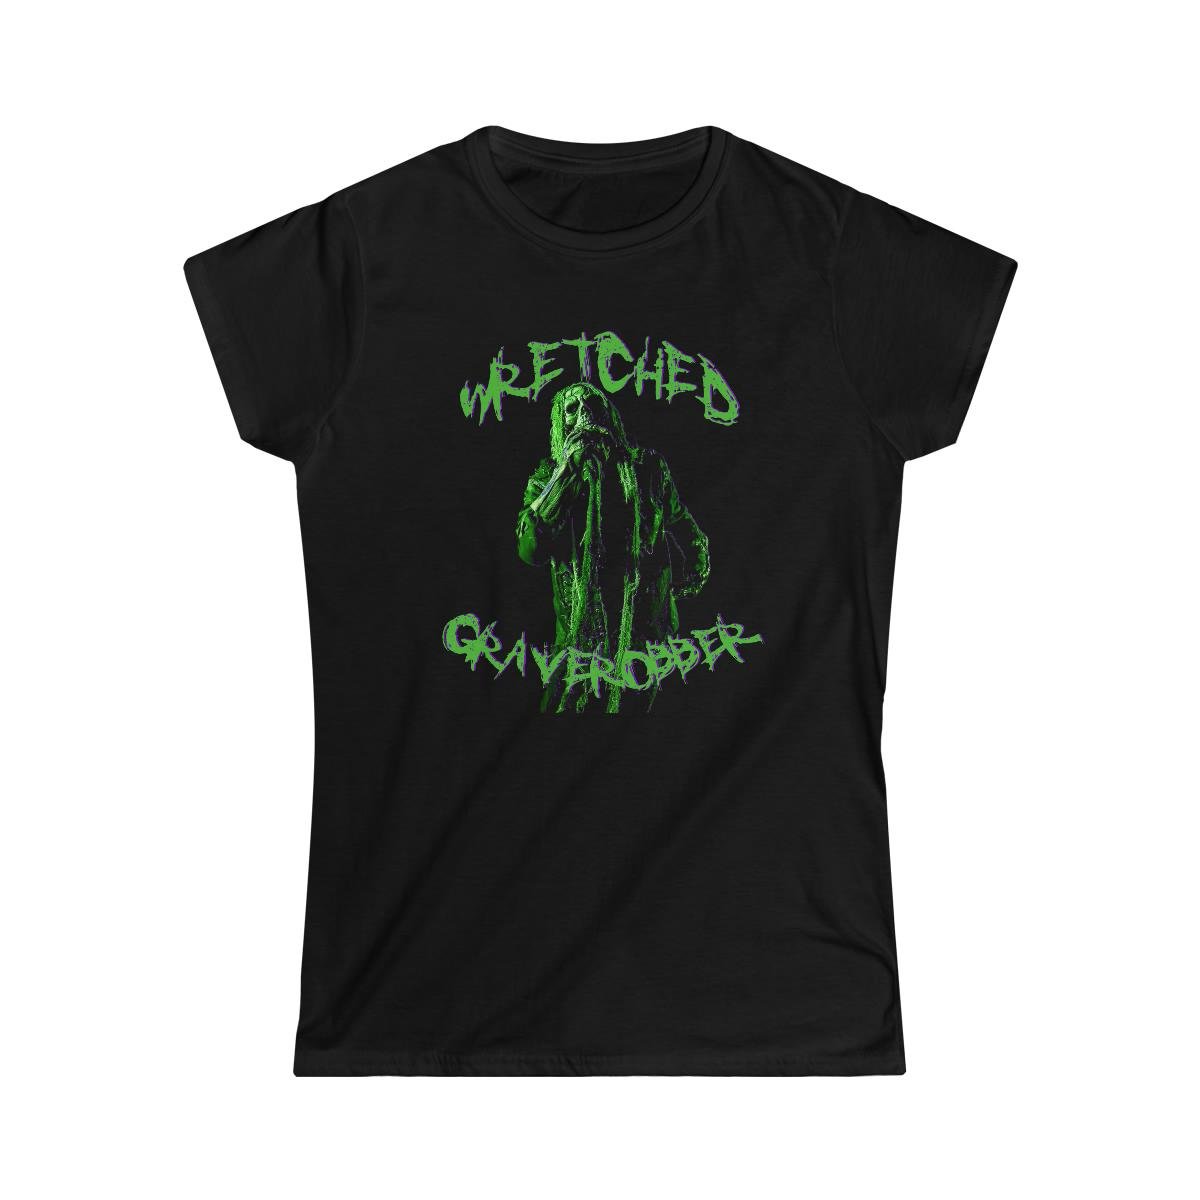 Wretched Graverobber – And I Walk Alone Women’s Short Sleeve Tshirt (2 Sided)